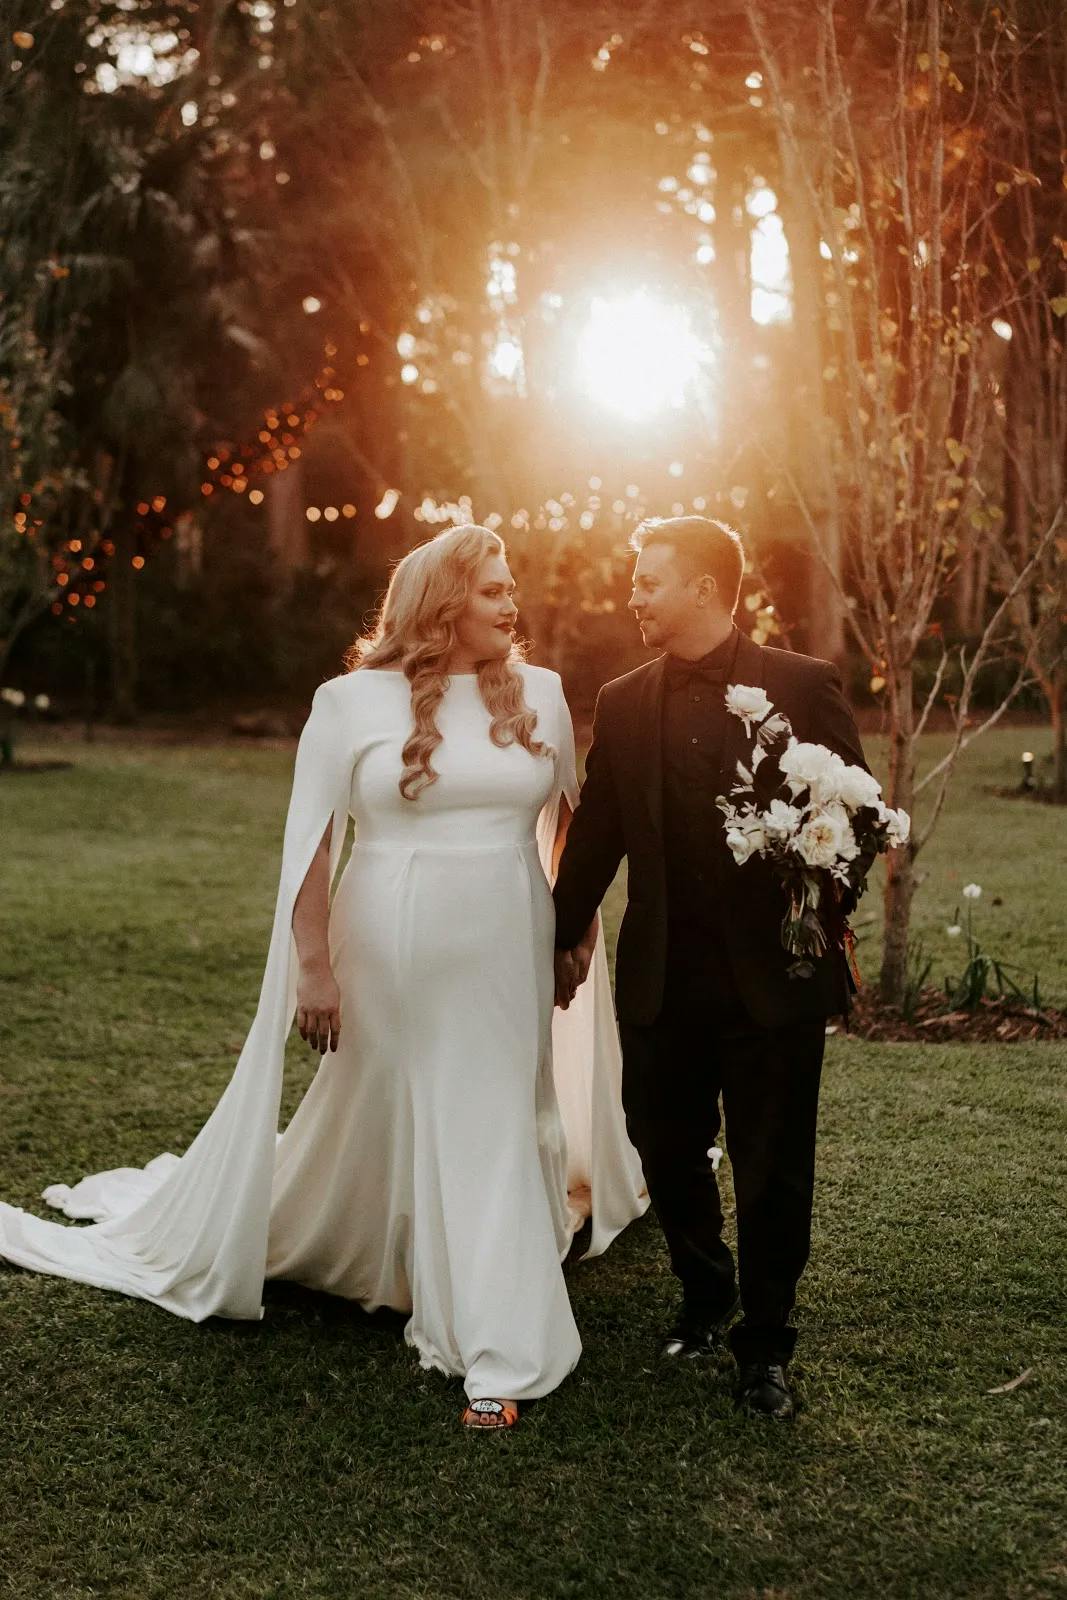 A woman in a white wedding gown with a long train and a man in a black suit holding a bouquet walk hand-in-hand on a grassy area. The setting sun filters through trees in the background, casting a warm glow and twinkling lights add a touch of magic to the scene.